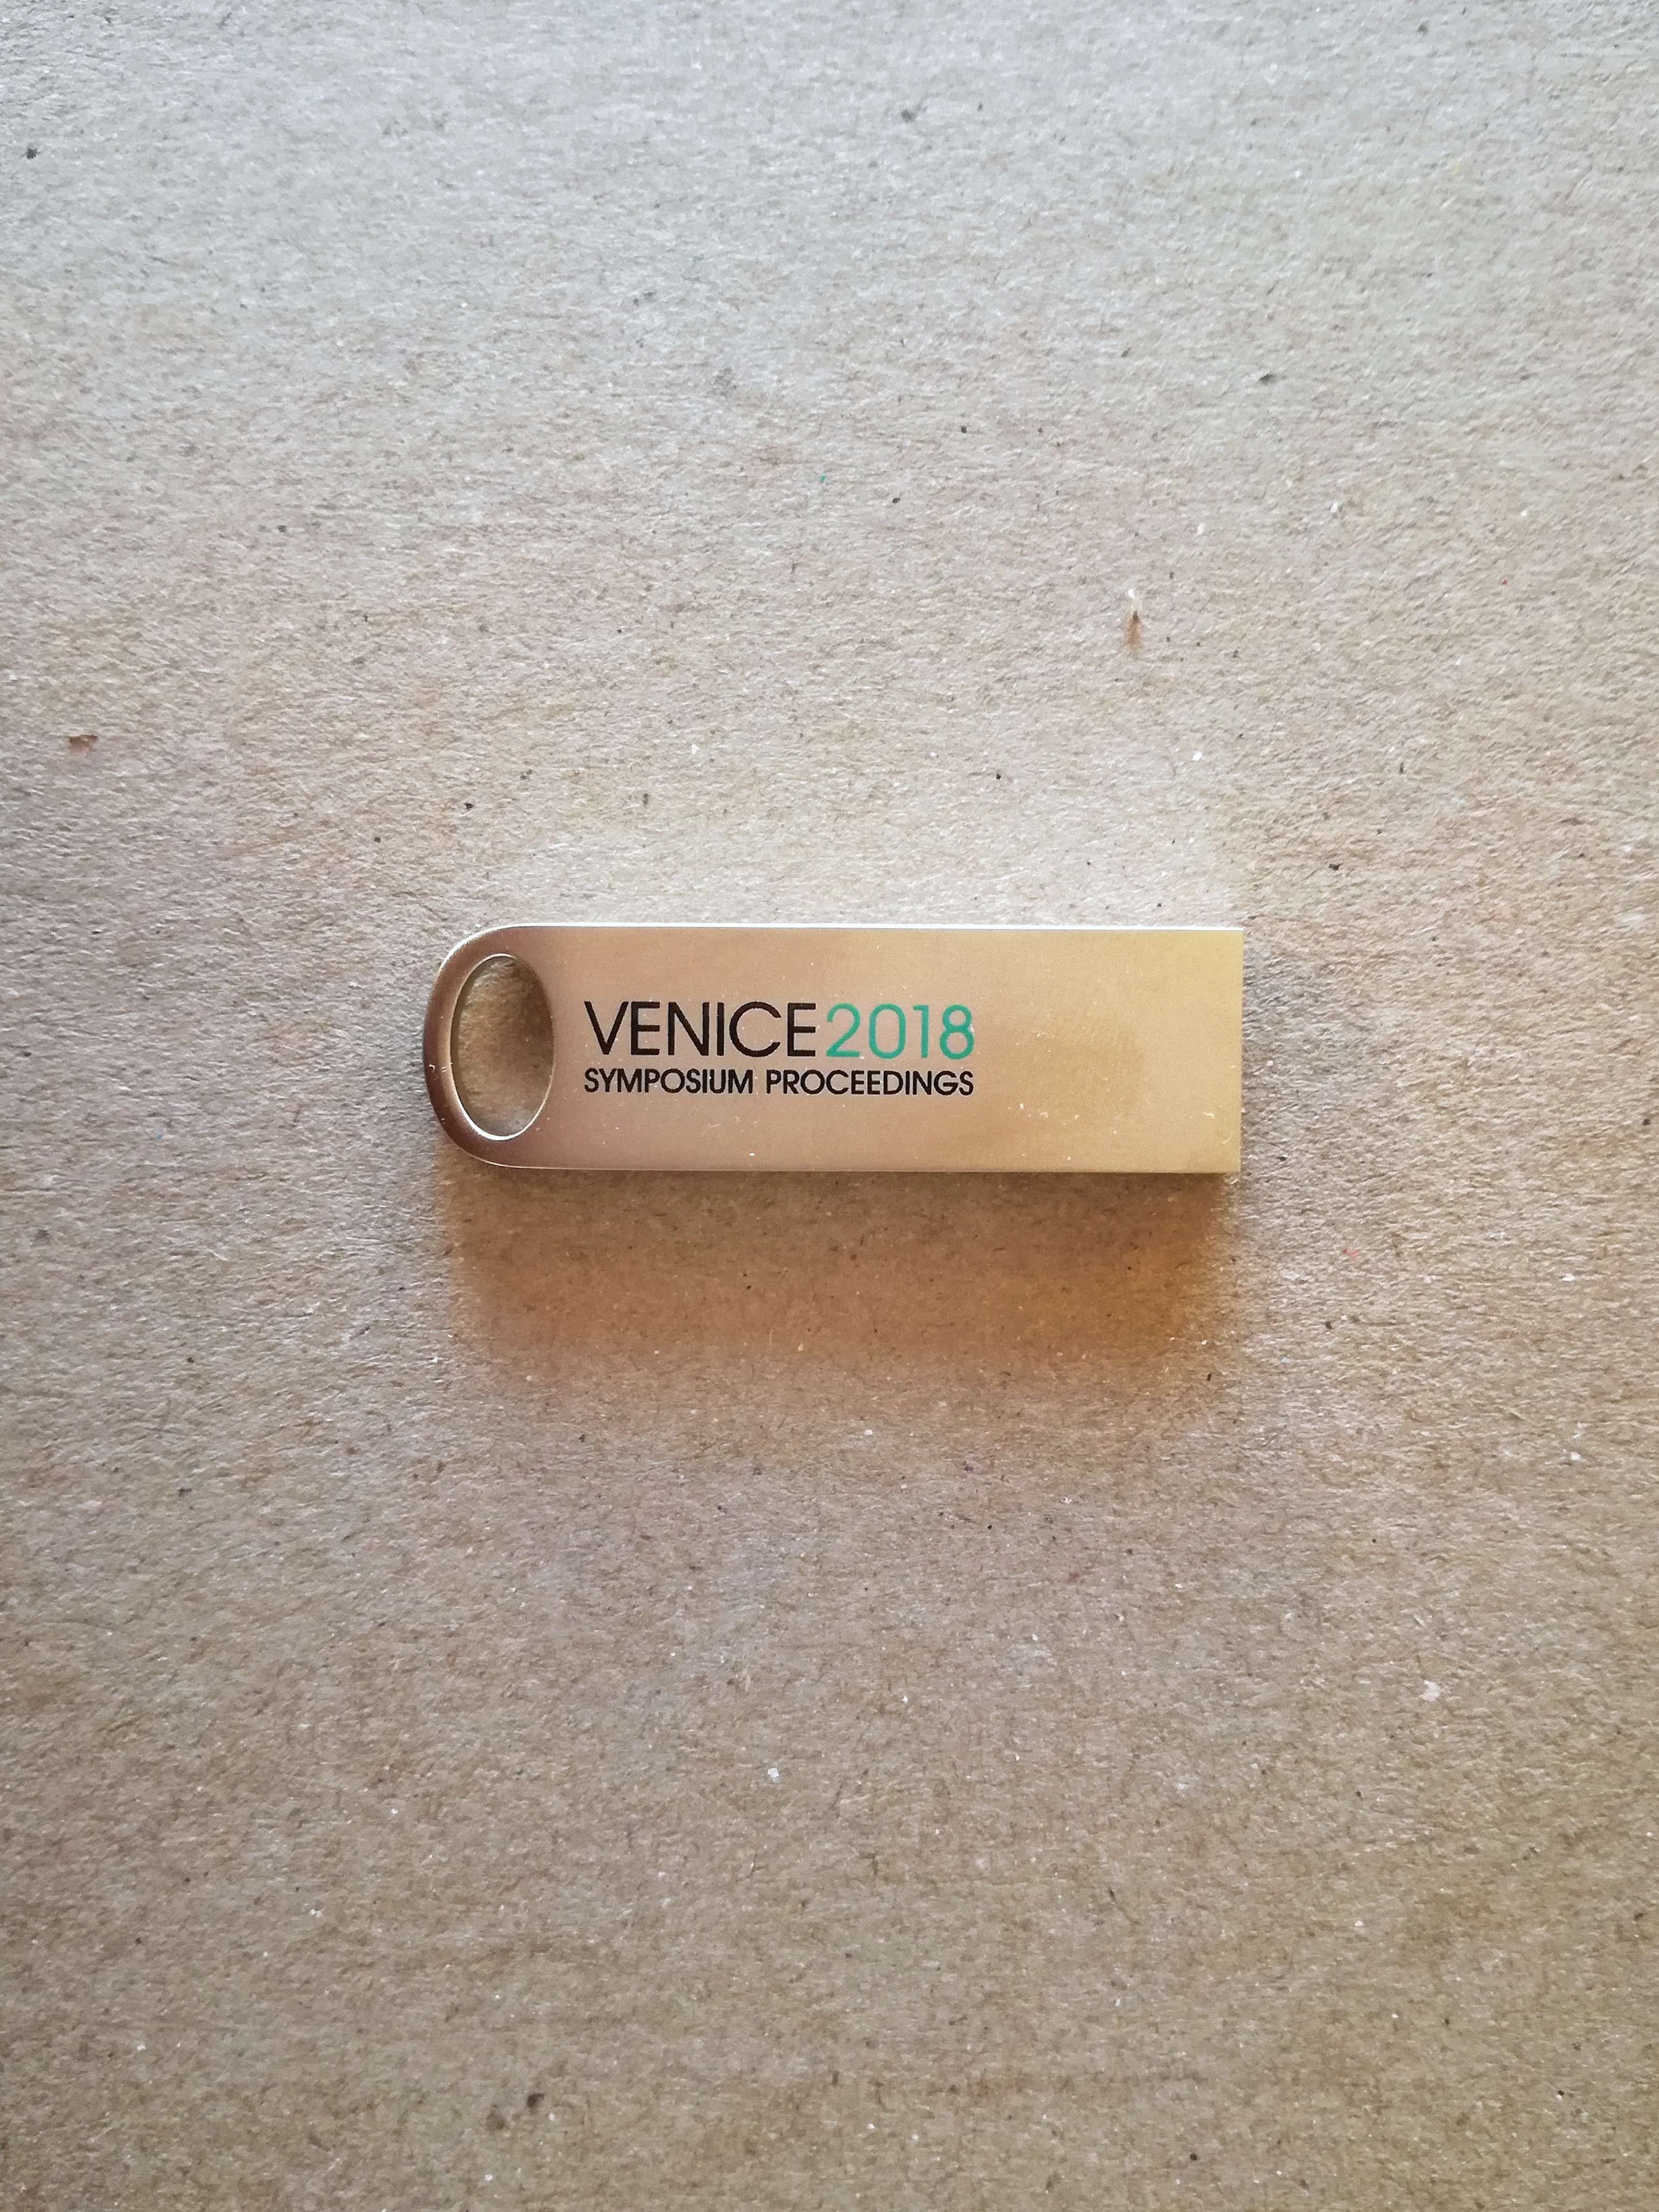 VENICE2018</br>7th International Symposium on Energy from Biomass and Waste (USB pendrive)